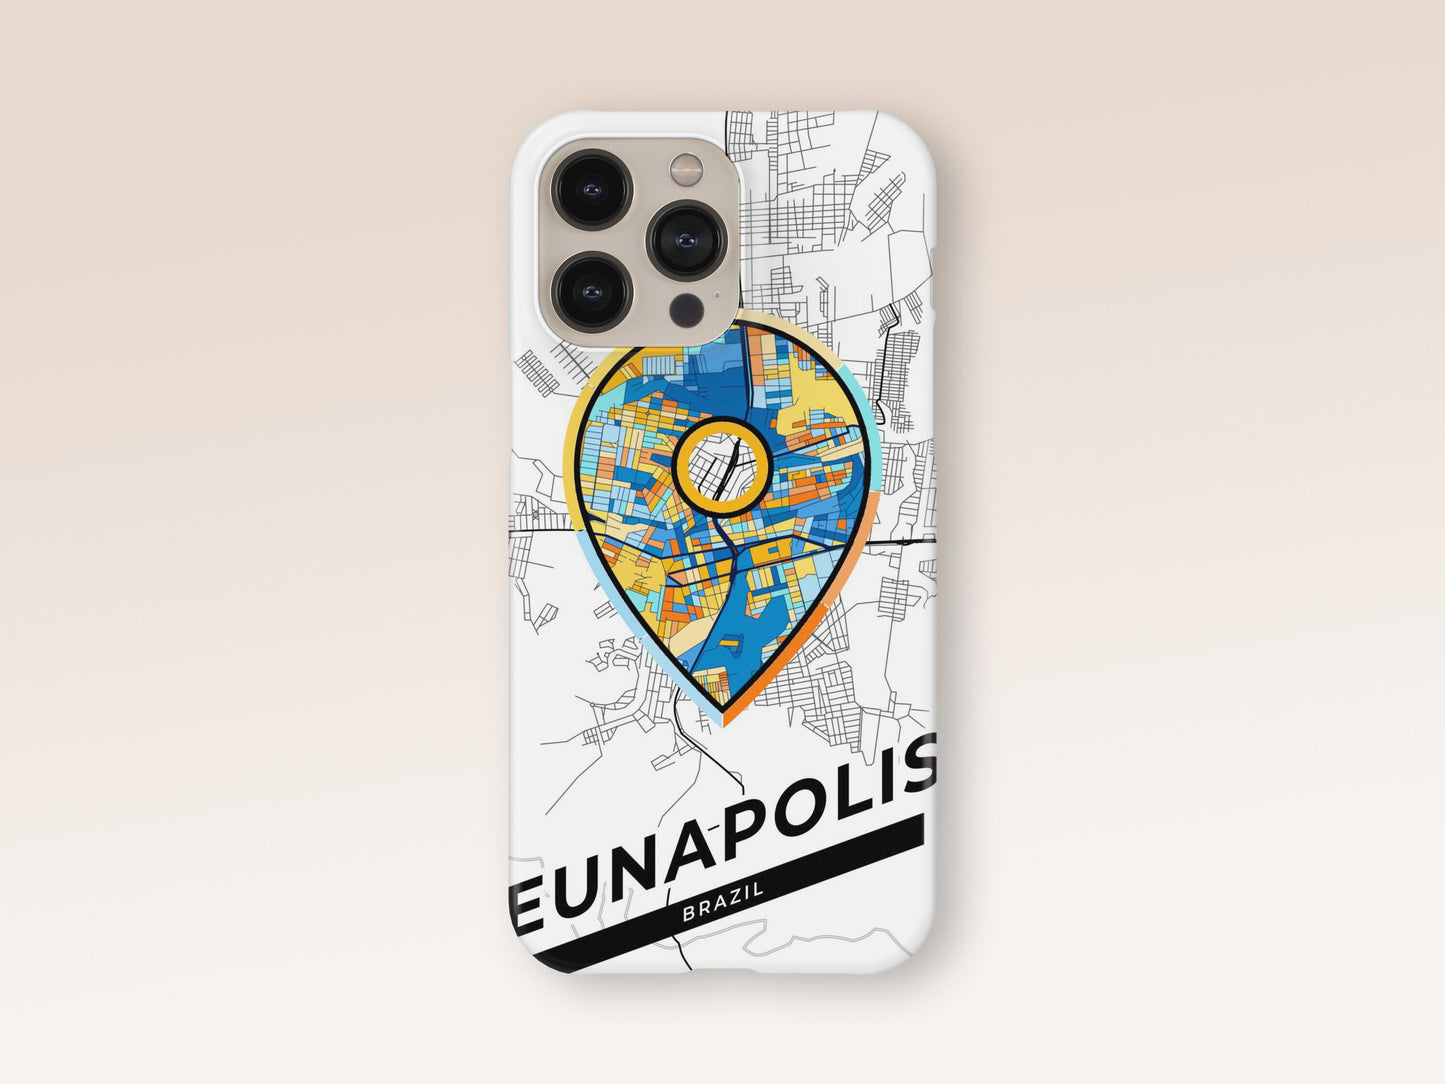 Eunapolis Brazil slim phone case with colorful icon. Birthday, wedding or housewarming gift. Couple match cases. 1